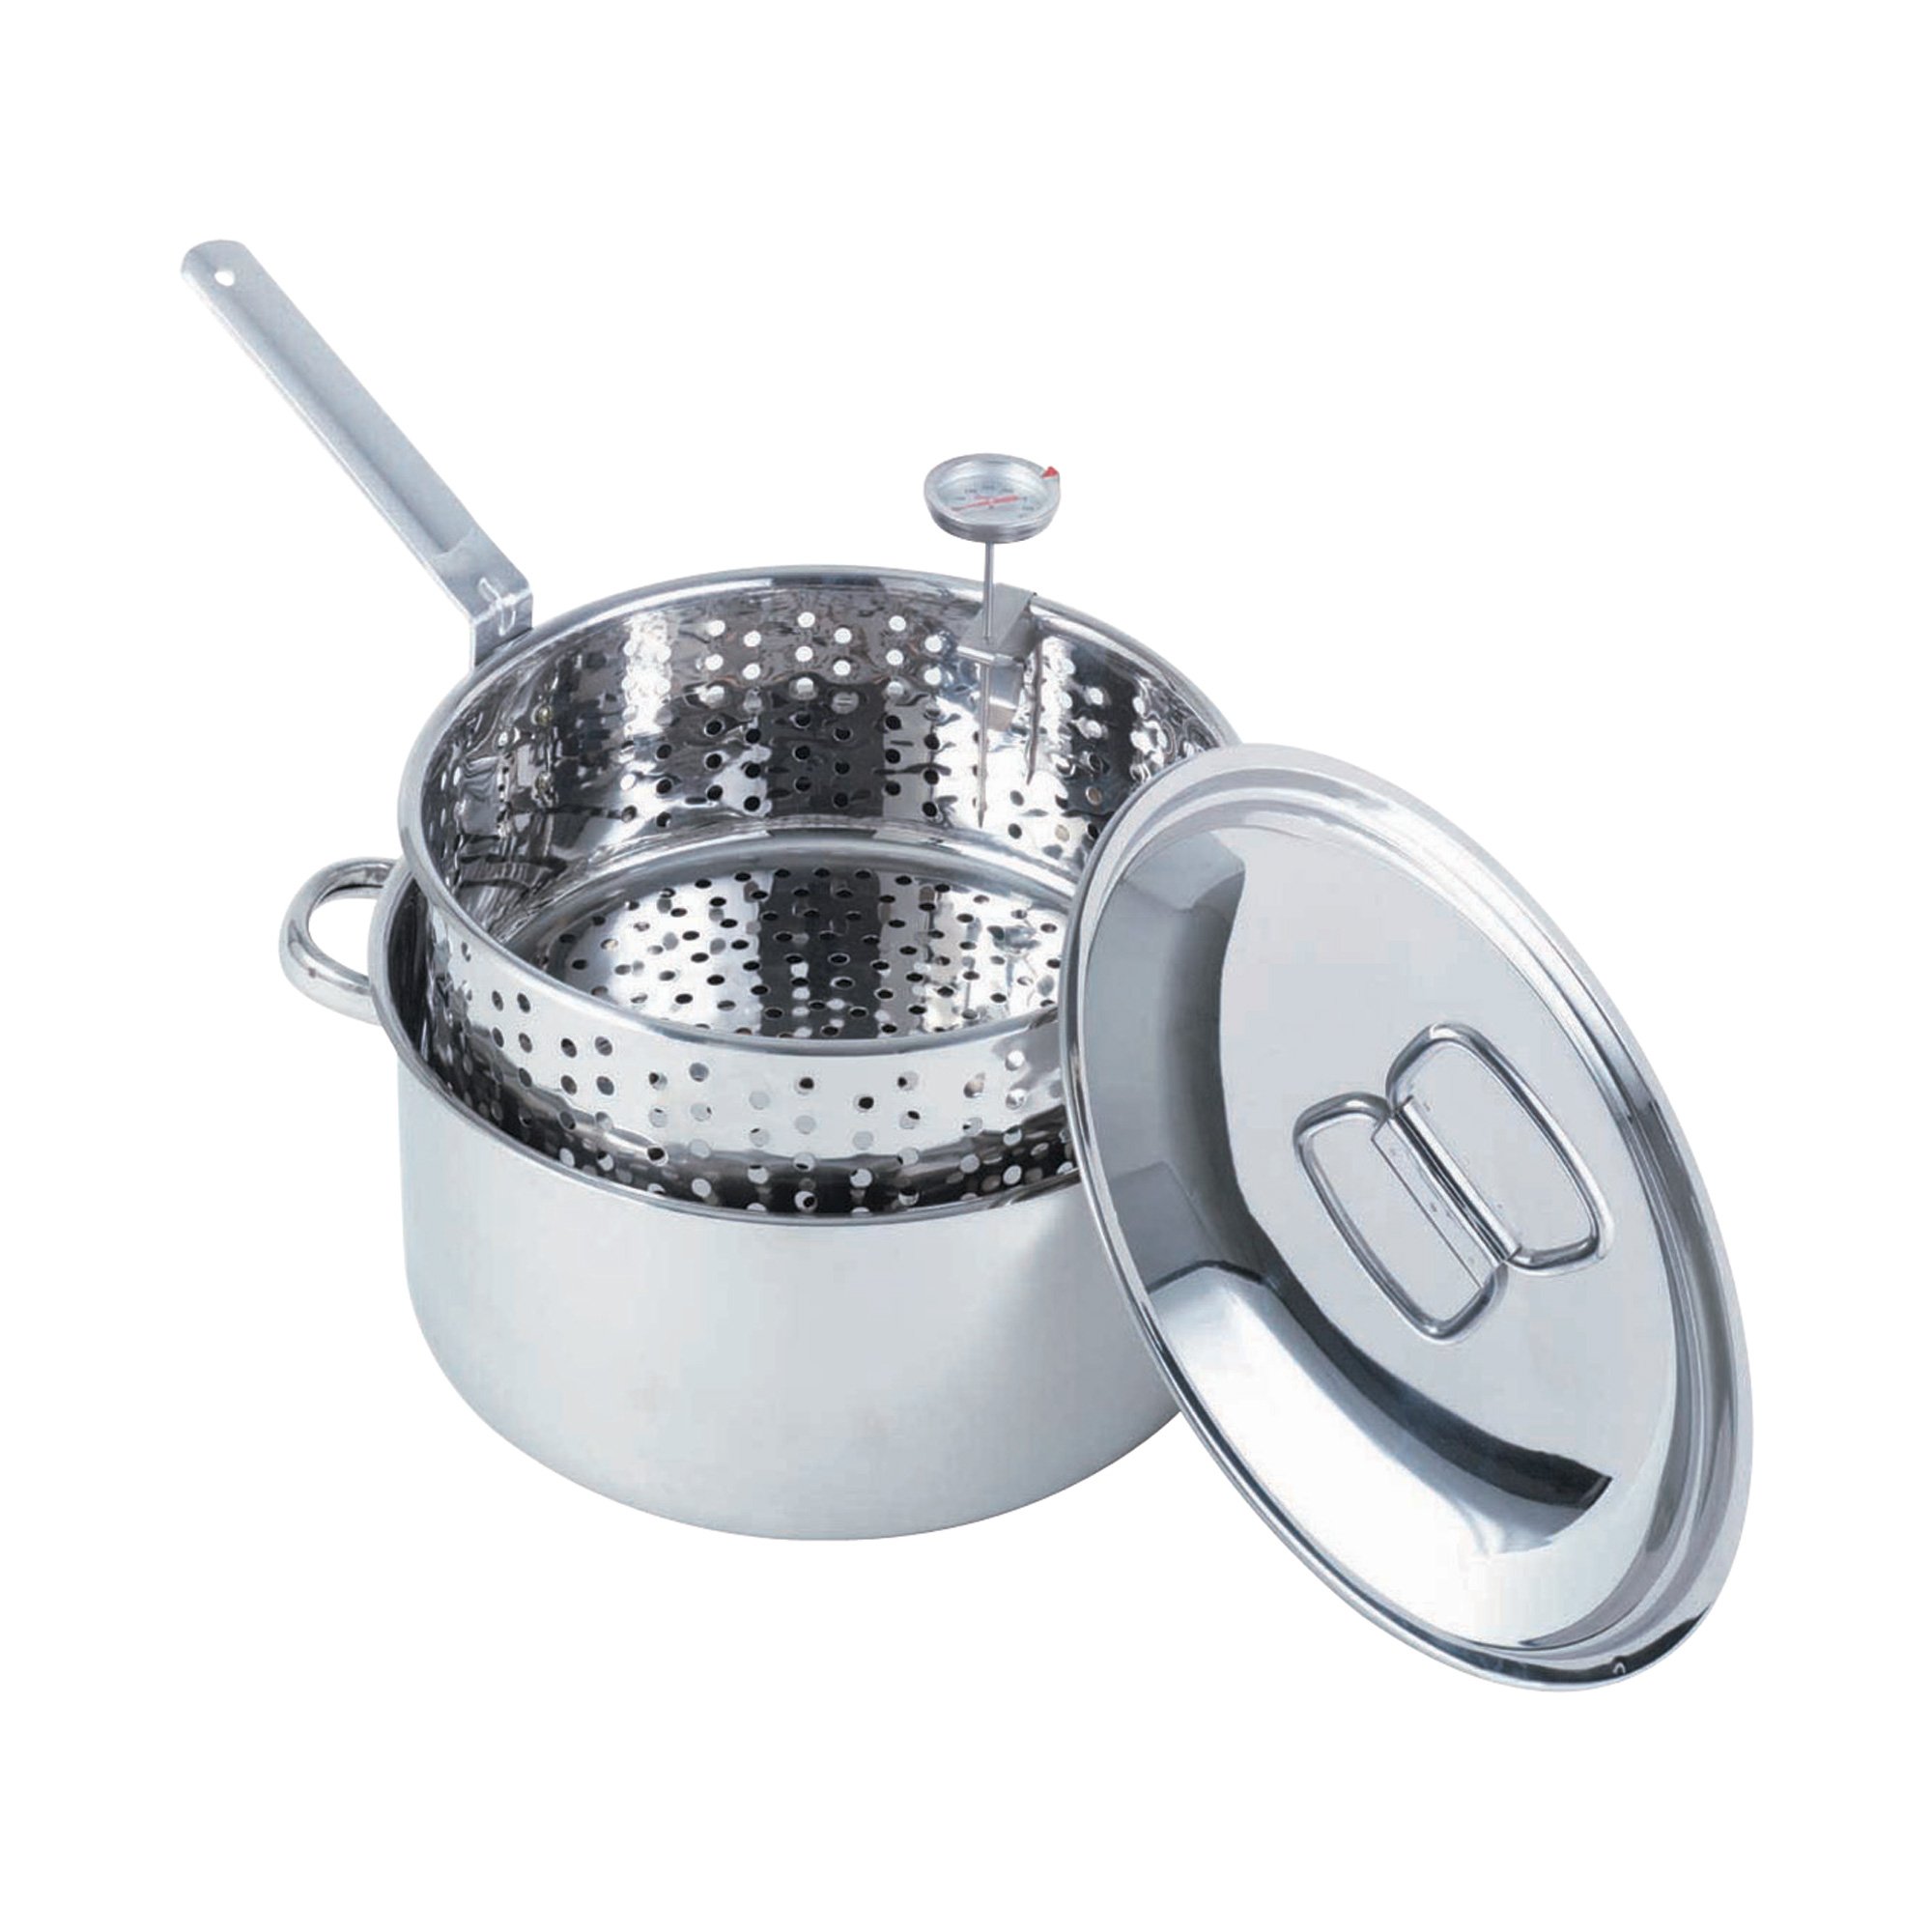 Bayou Classic 1101 10-qt Stainless Steel Fry Pot Perfect For Frying Fish  Shrimp Chicken Hushpuppies and Fries Includes Stainless Steel Perforated